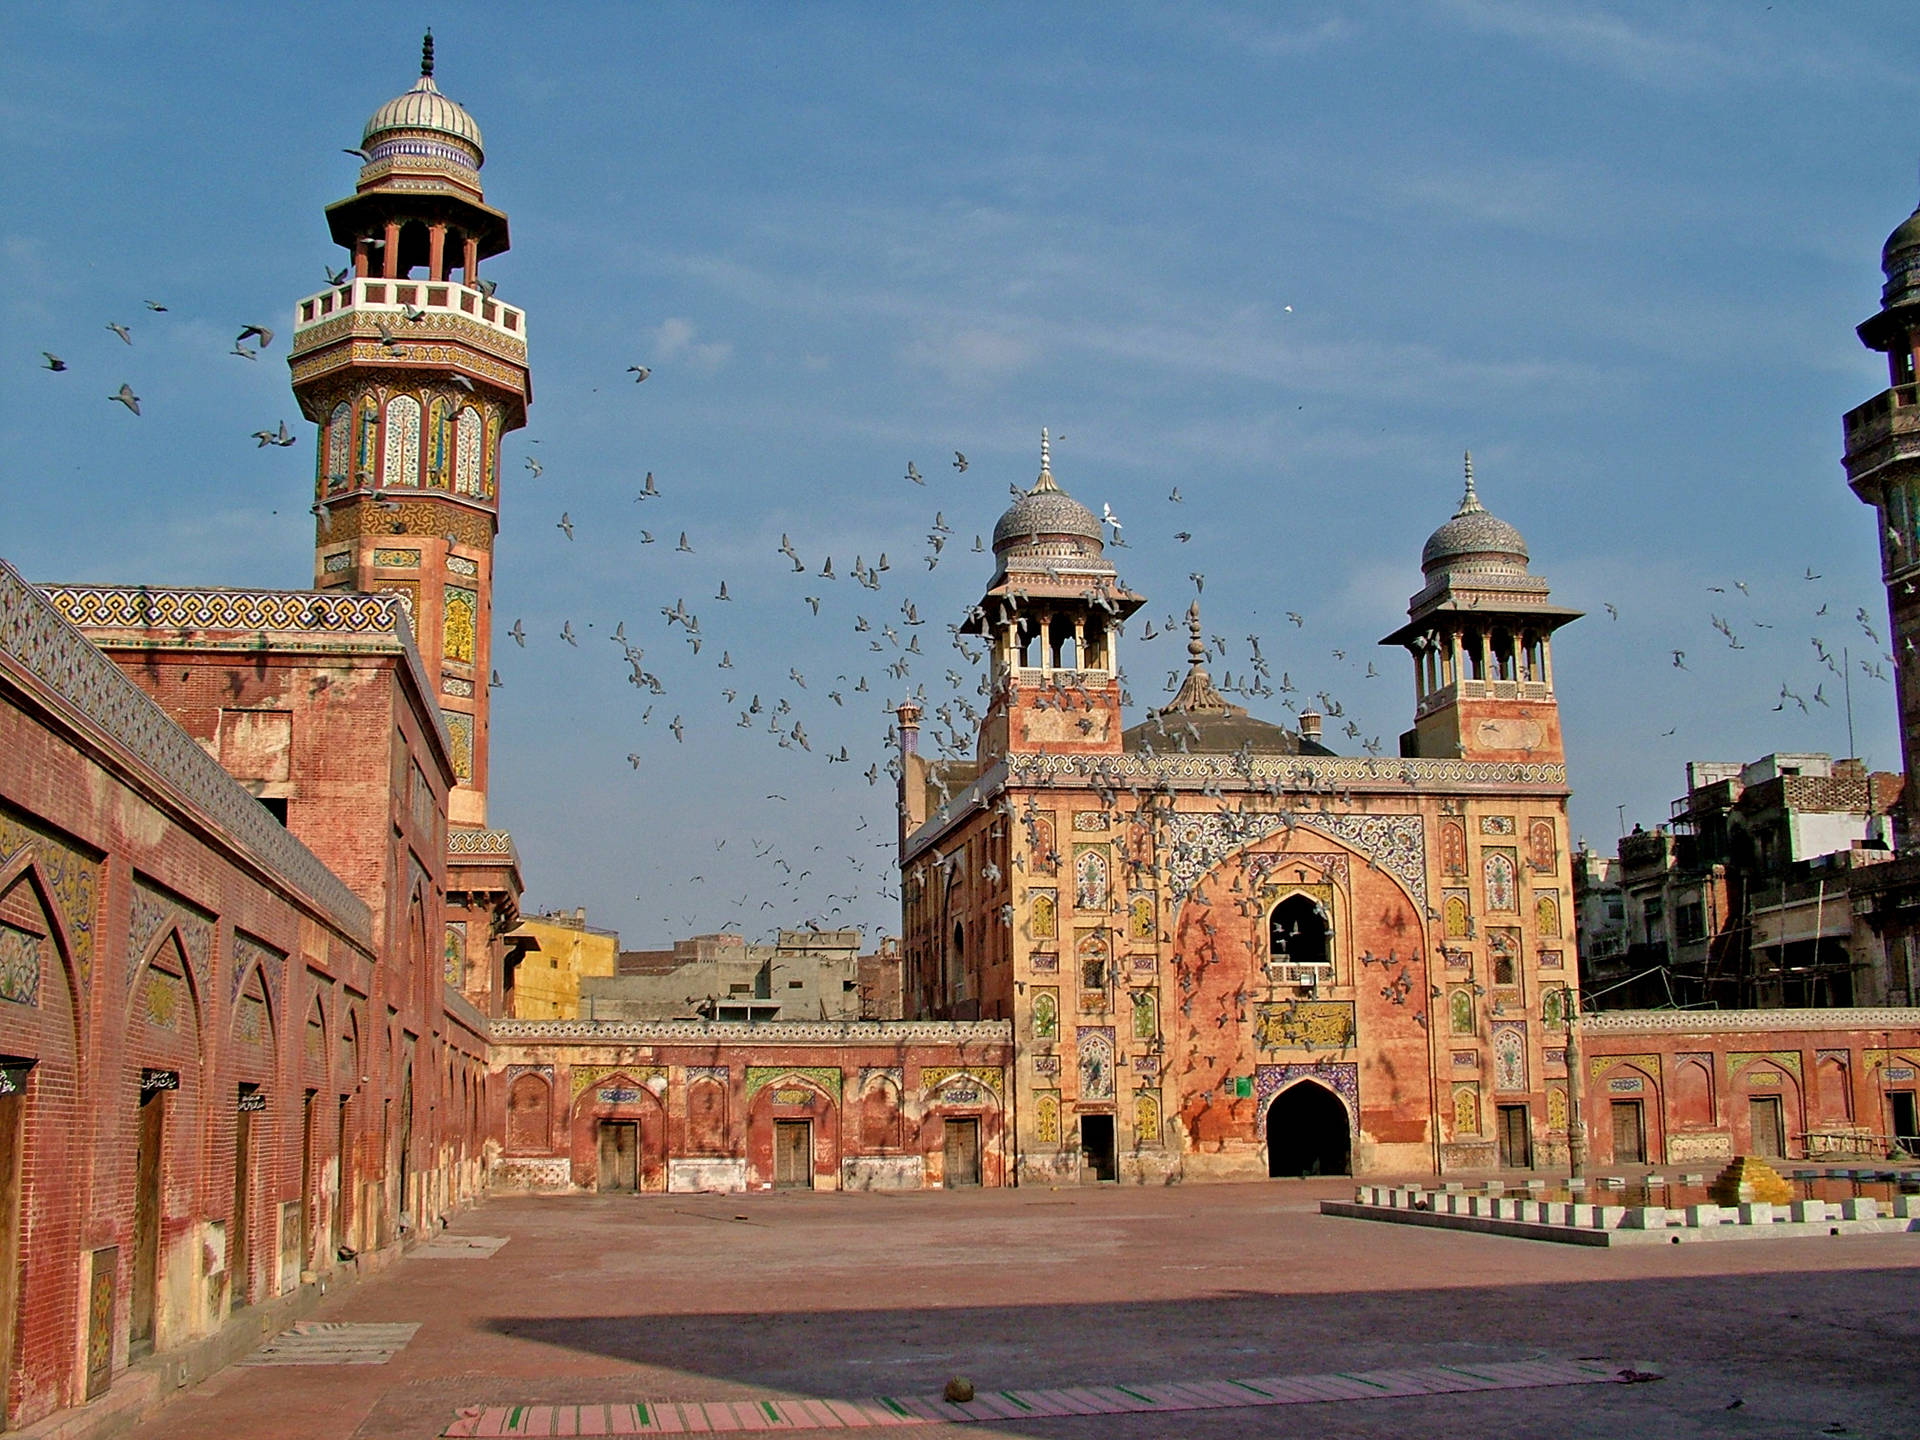 Lahoremasjid Wazir Khan Is A Famous Mosque In Pakistan, Known For Its Beautiful Architecture And Intricate Tile Work. It Is A Popular Tourist Attraction And A Symbol Of The Rich Cultural Heritage Of Lahore. The Mosque Was Built In The 17th Century By The Governor Of Lahore, Nawab Wazir Khan, And Is A Testament To The Mughal Era's Architectural Prowess. Its Stunning Design And Vibrant Colors Make It A Popular Choice For Computer Or Mobile Wallpapers. Fondo de pantalla